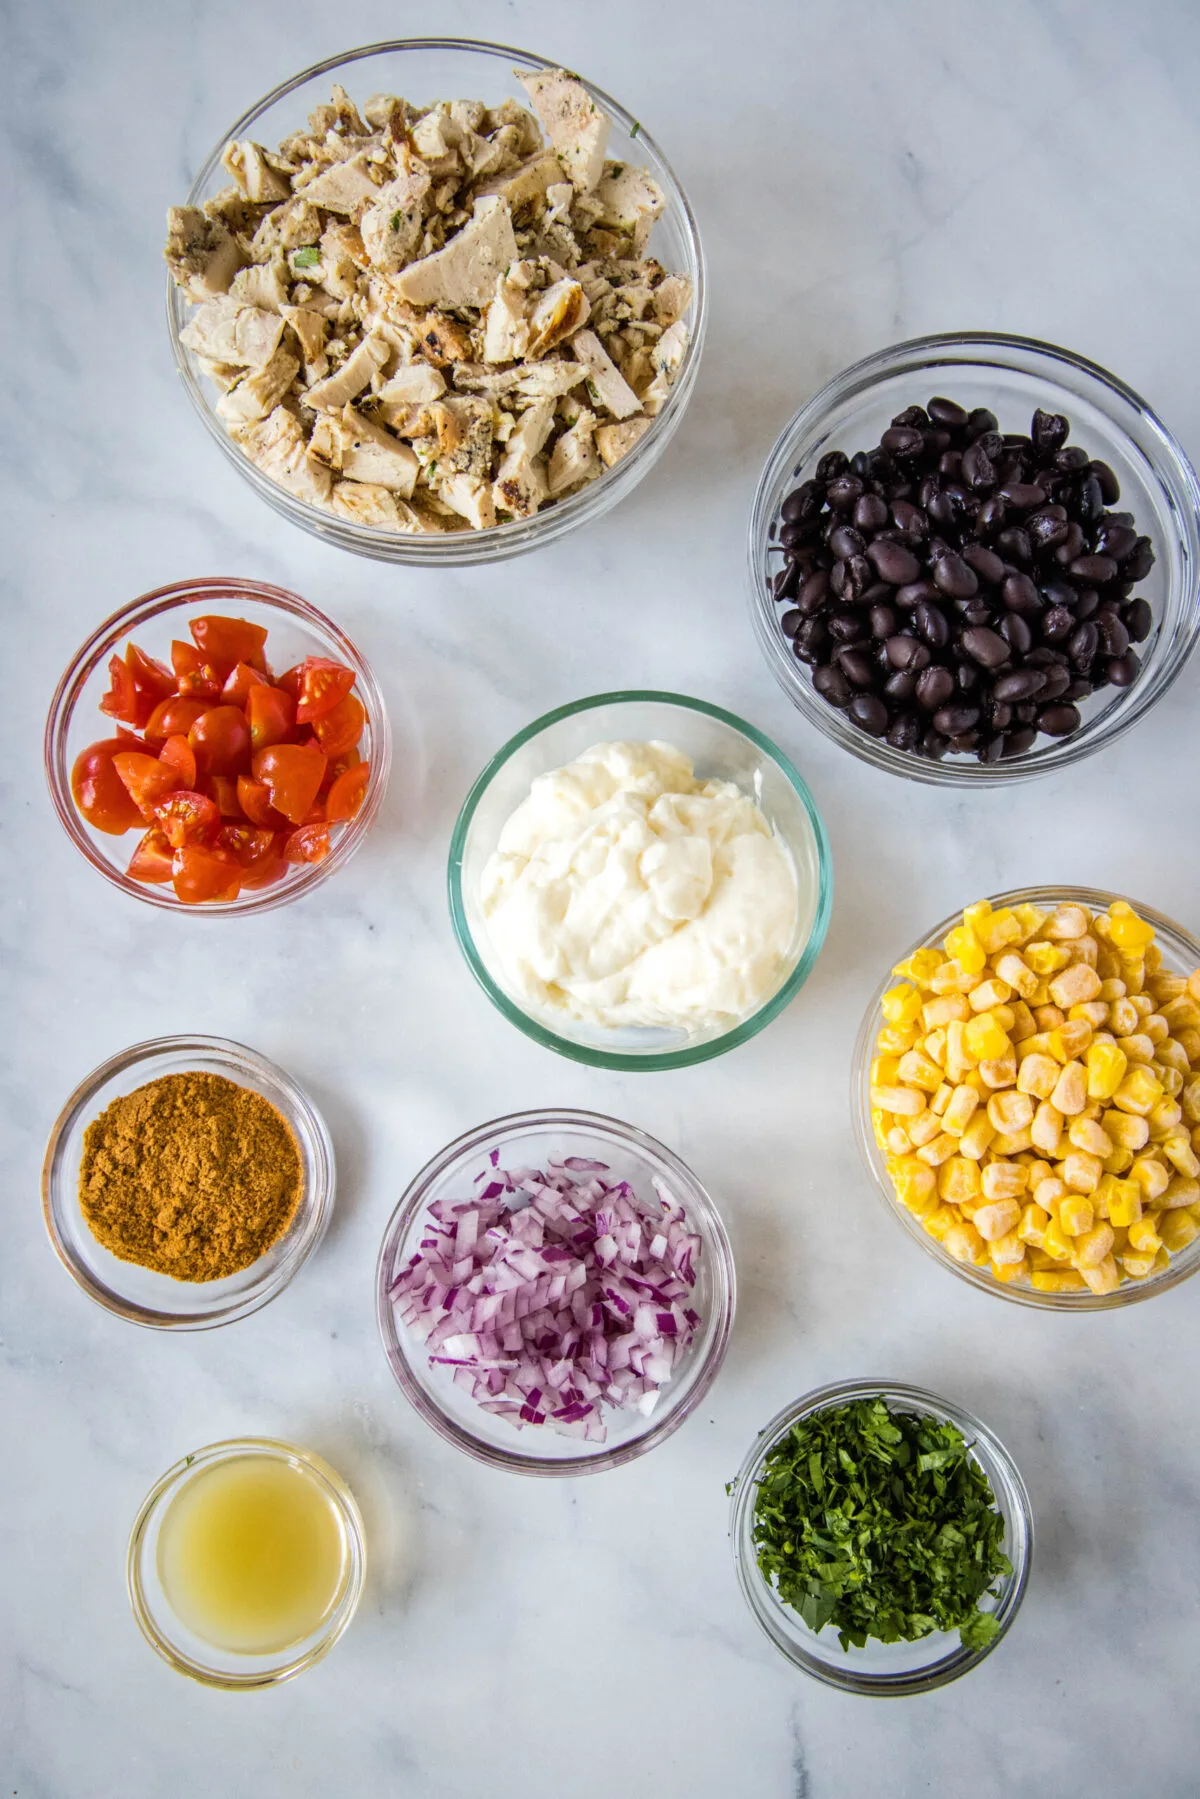 Overhead view of the ingredients needed for southwest chicken salad: a bowl of shredded chicken, a bowl of black beans, a bowl of chopped tomatoes, a bowl of mayo, a bowl of corn, a bowl of chopped onion, a bowl of cilantro, a bowl of taco seasoning, and a bowl of lime juice